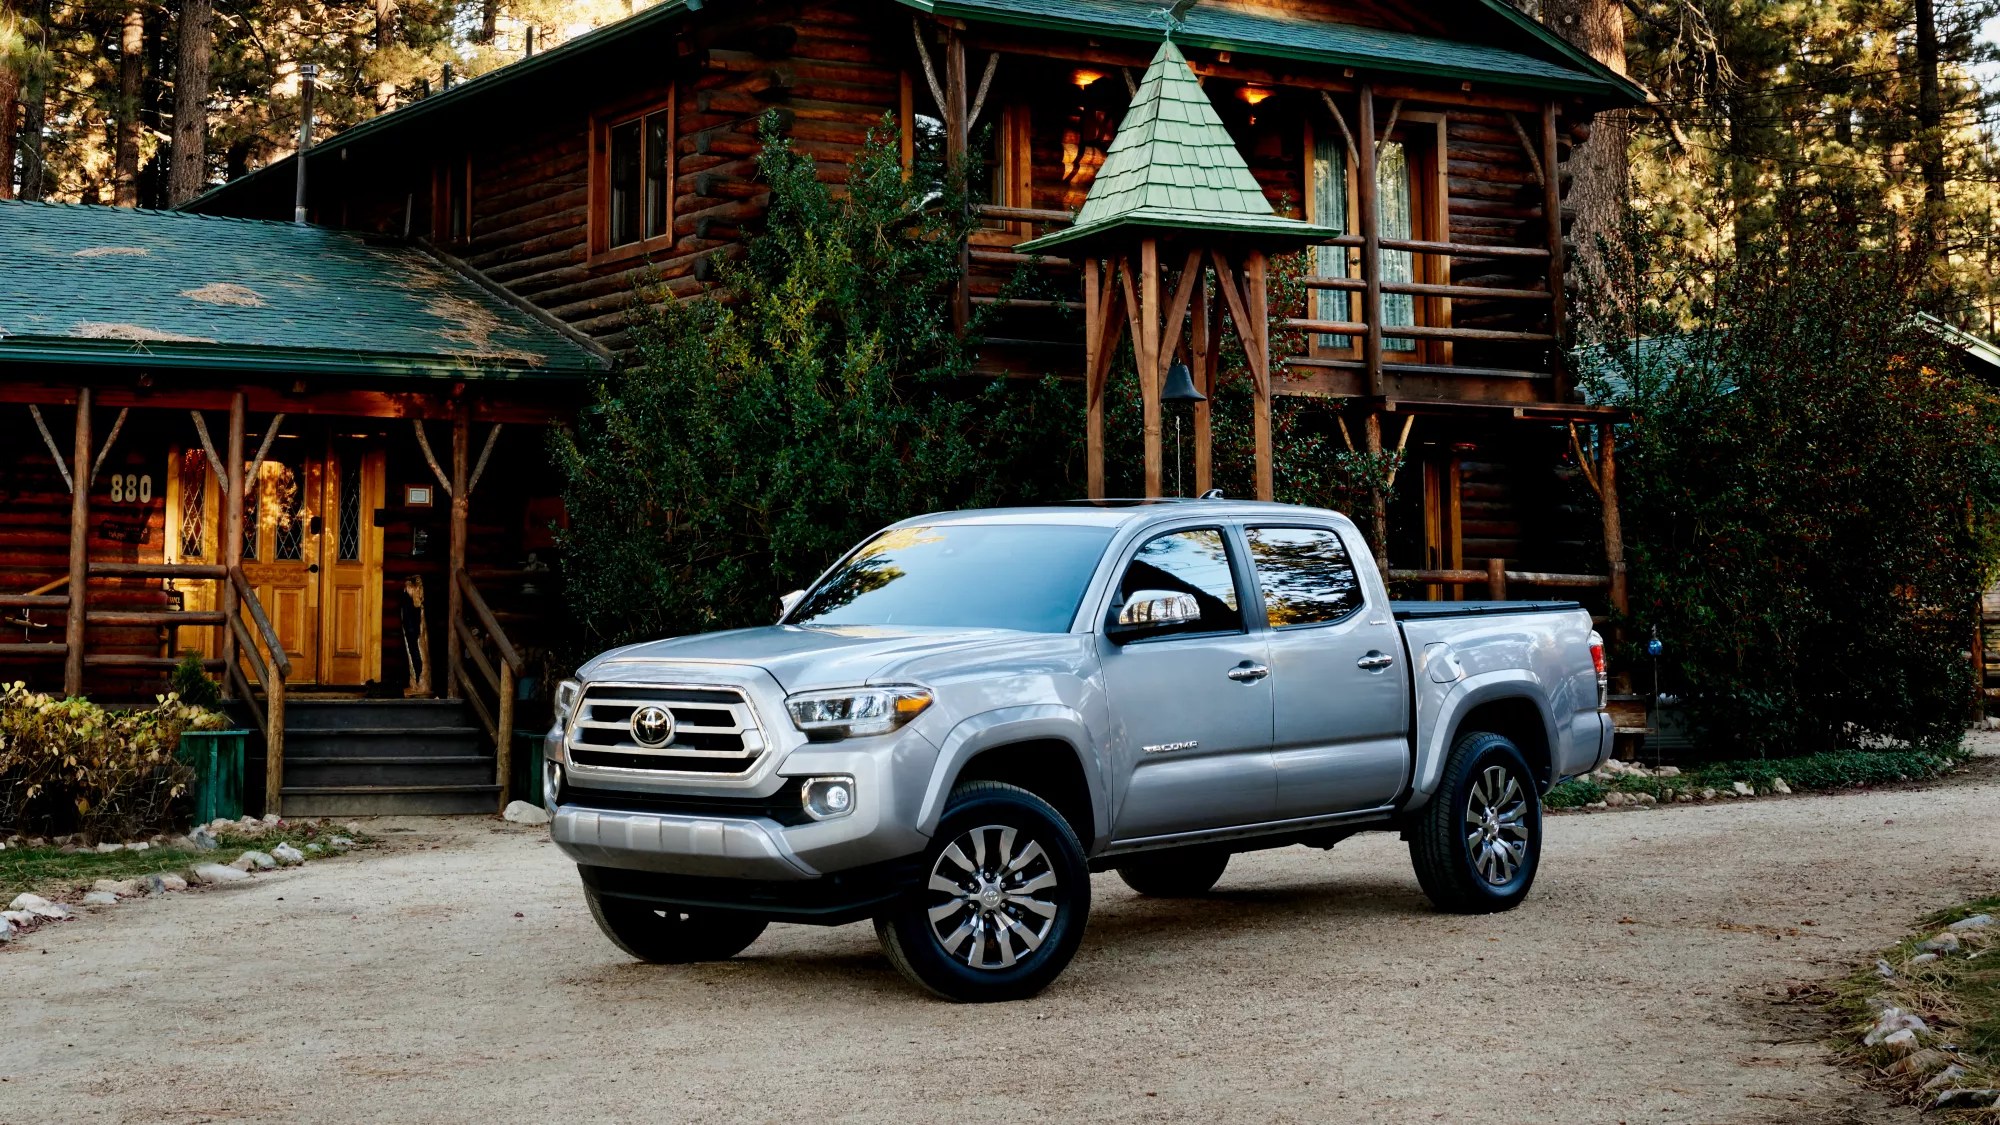 The 2022 Toyota Tacoma is a mid-size truck that has serious capability.